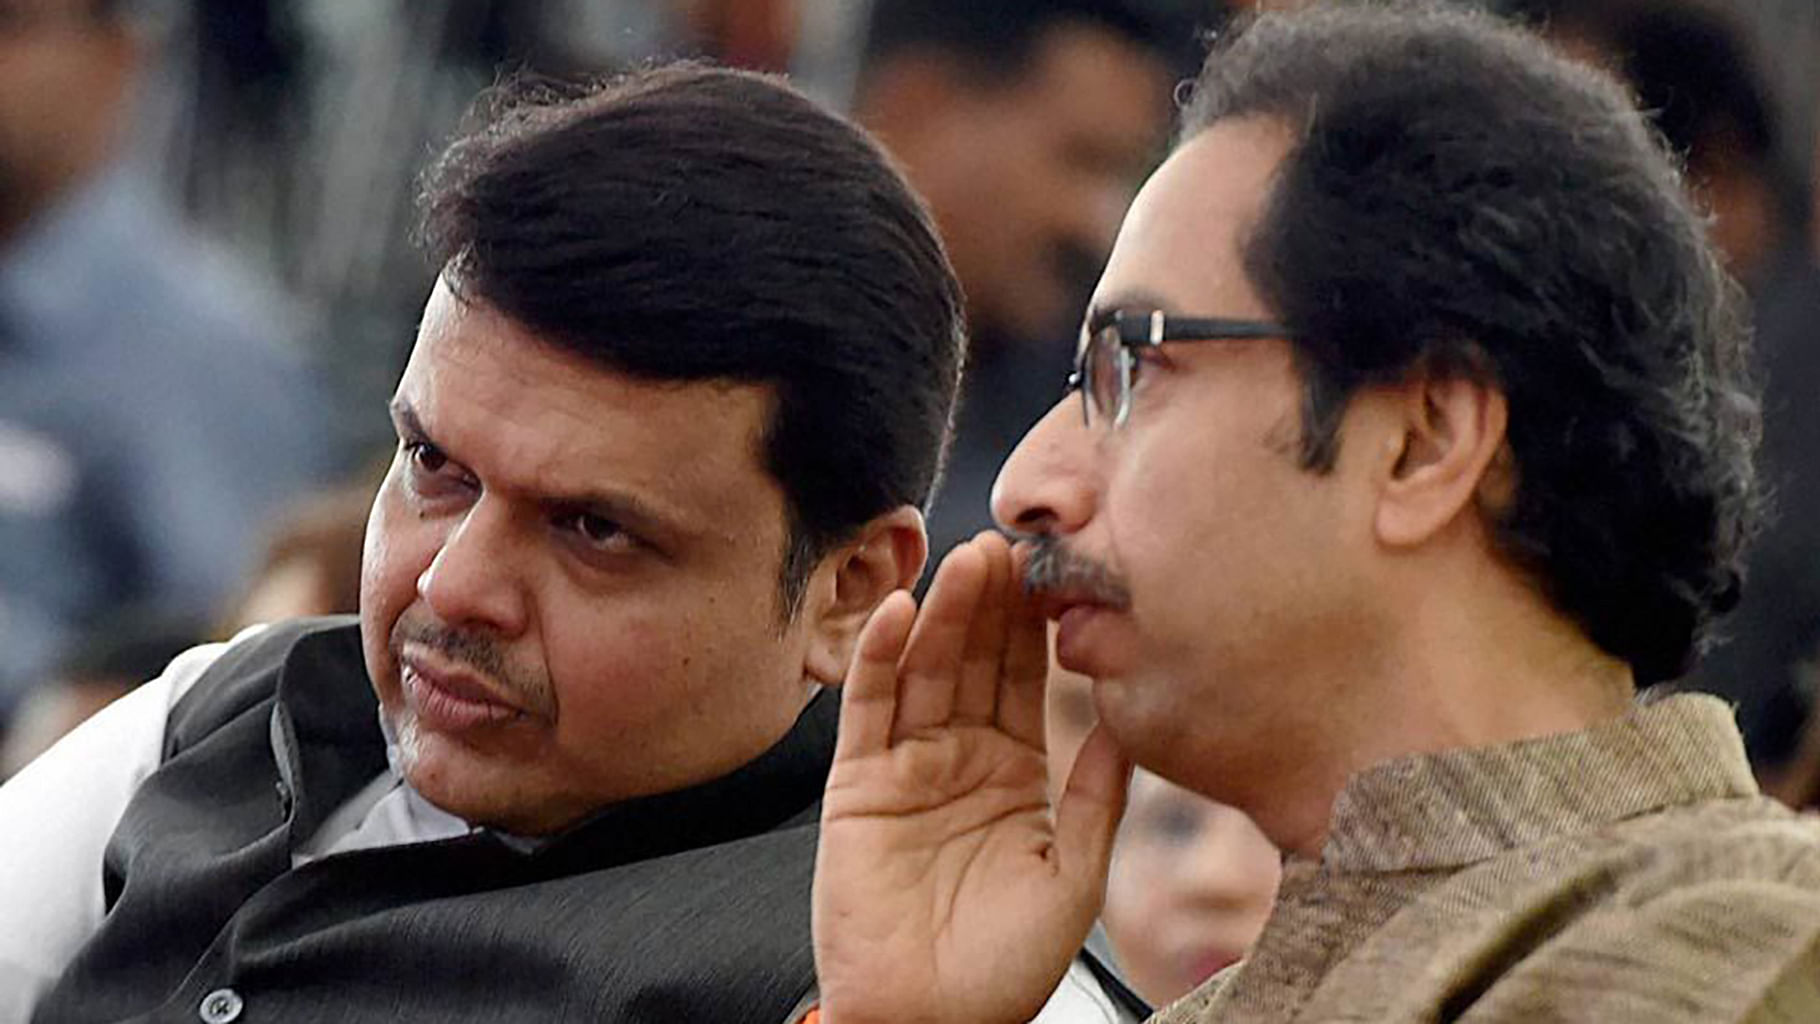 Shiv Sena chief Uddhav Thackeray on Saturday said that talks with BJP chief Amit Shah were progressing well and a final decision would be announced soon.